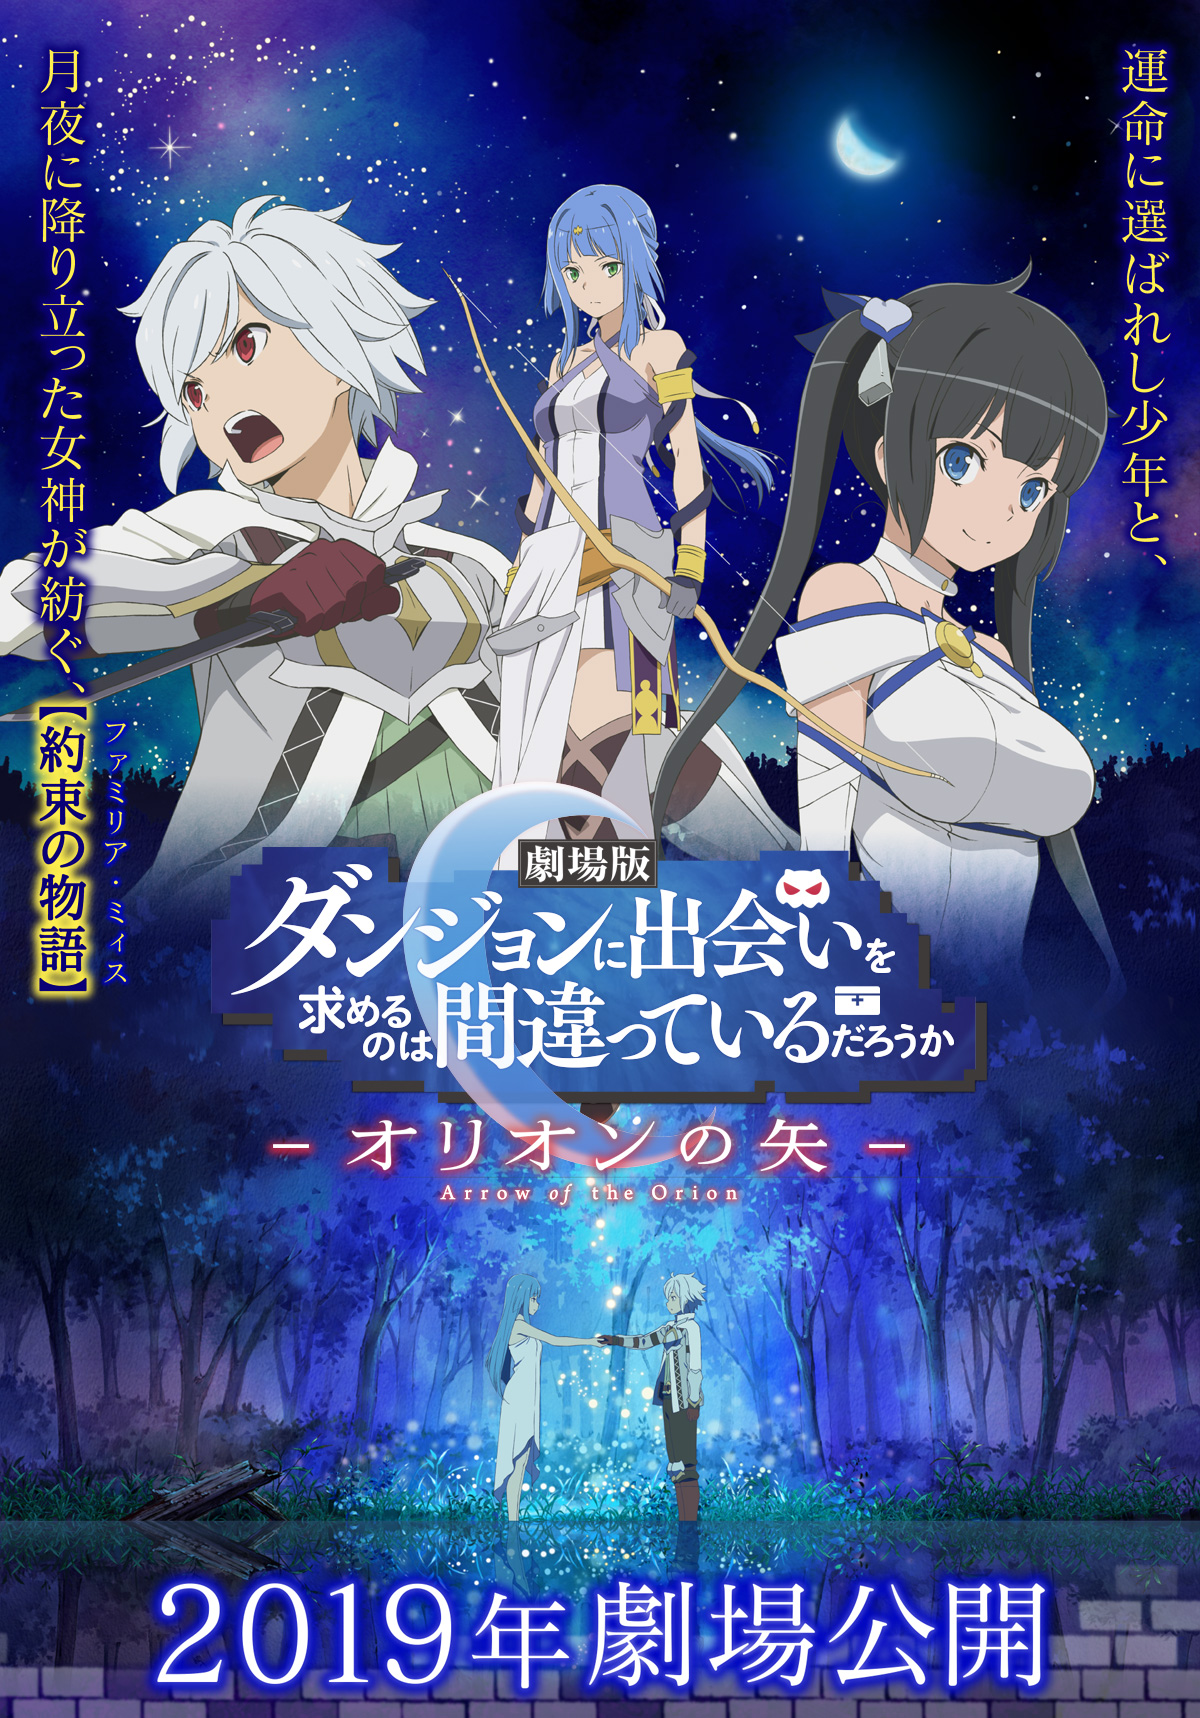 This DanMachi Anime Game Comes With a Waifu Pillow Case! - GameSpace.com